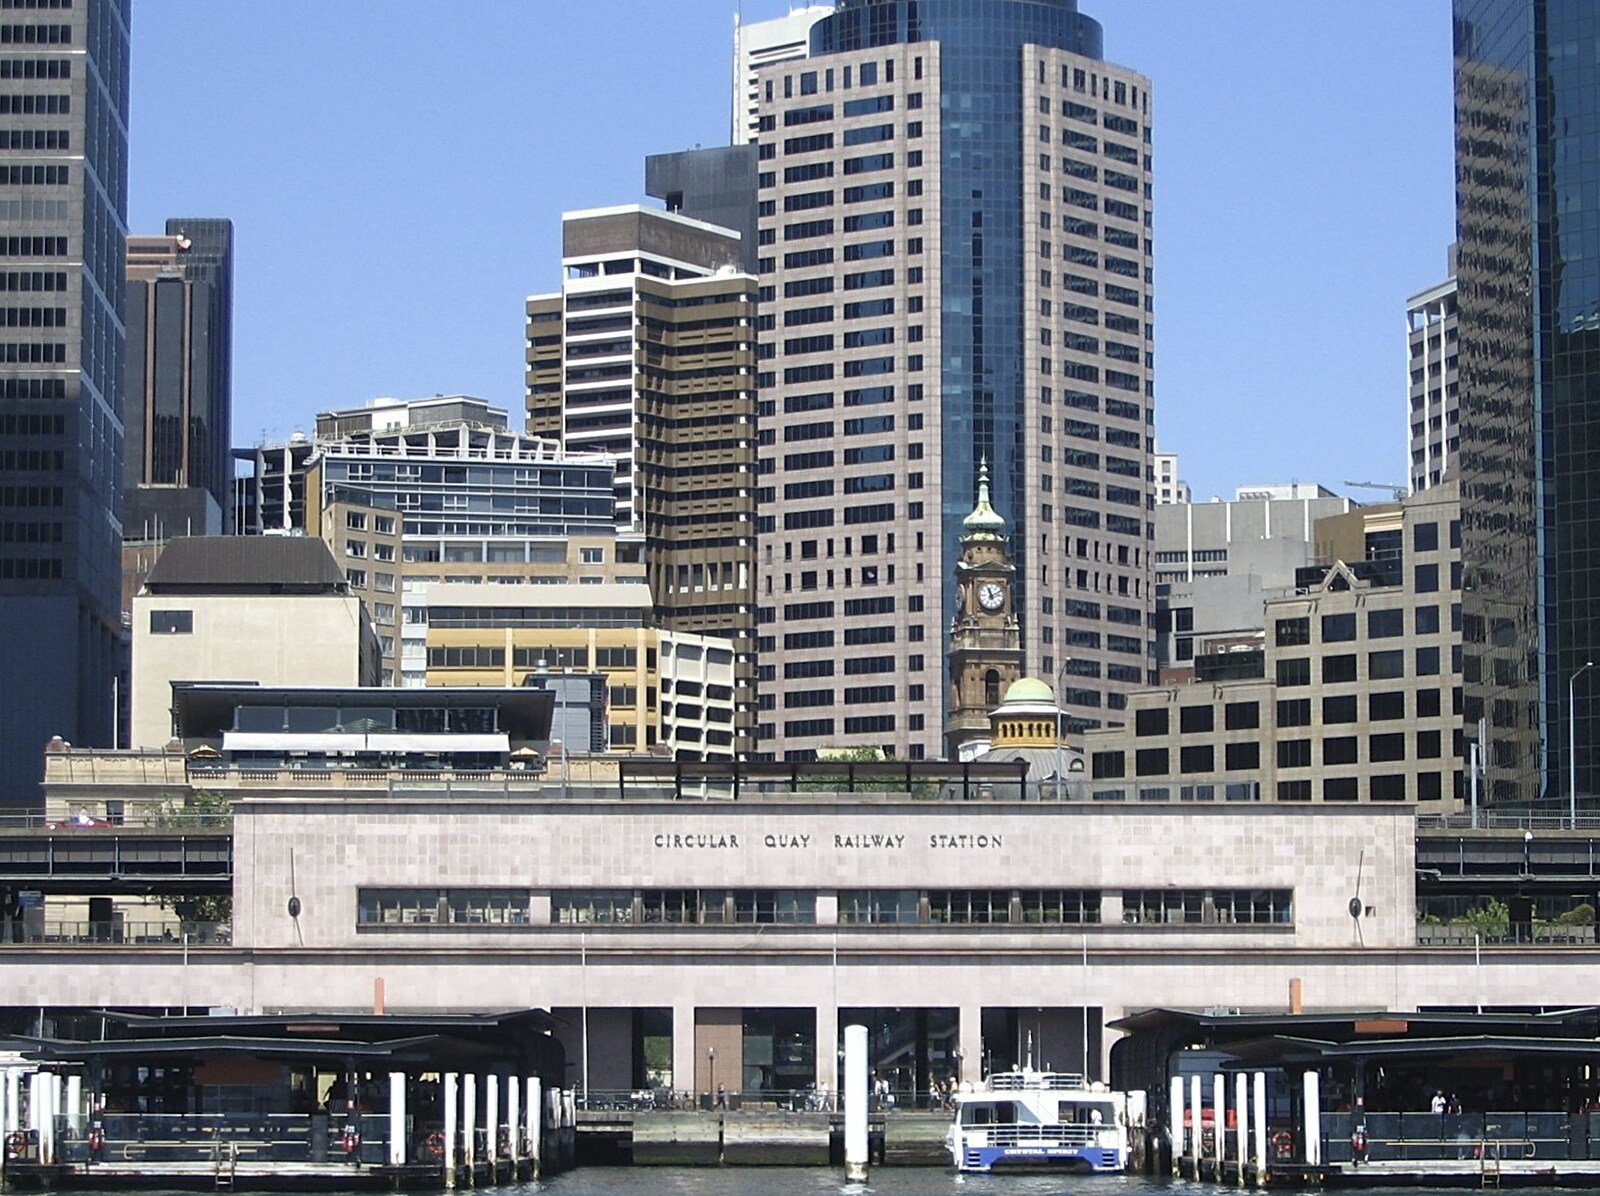 Circular Quay railway station from Sydney, New South Wales, Australia - 10th October 2004